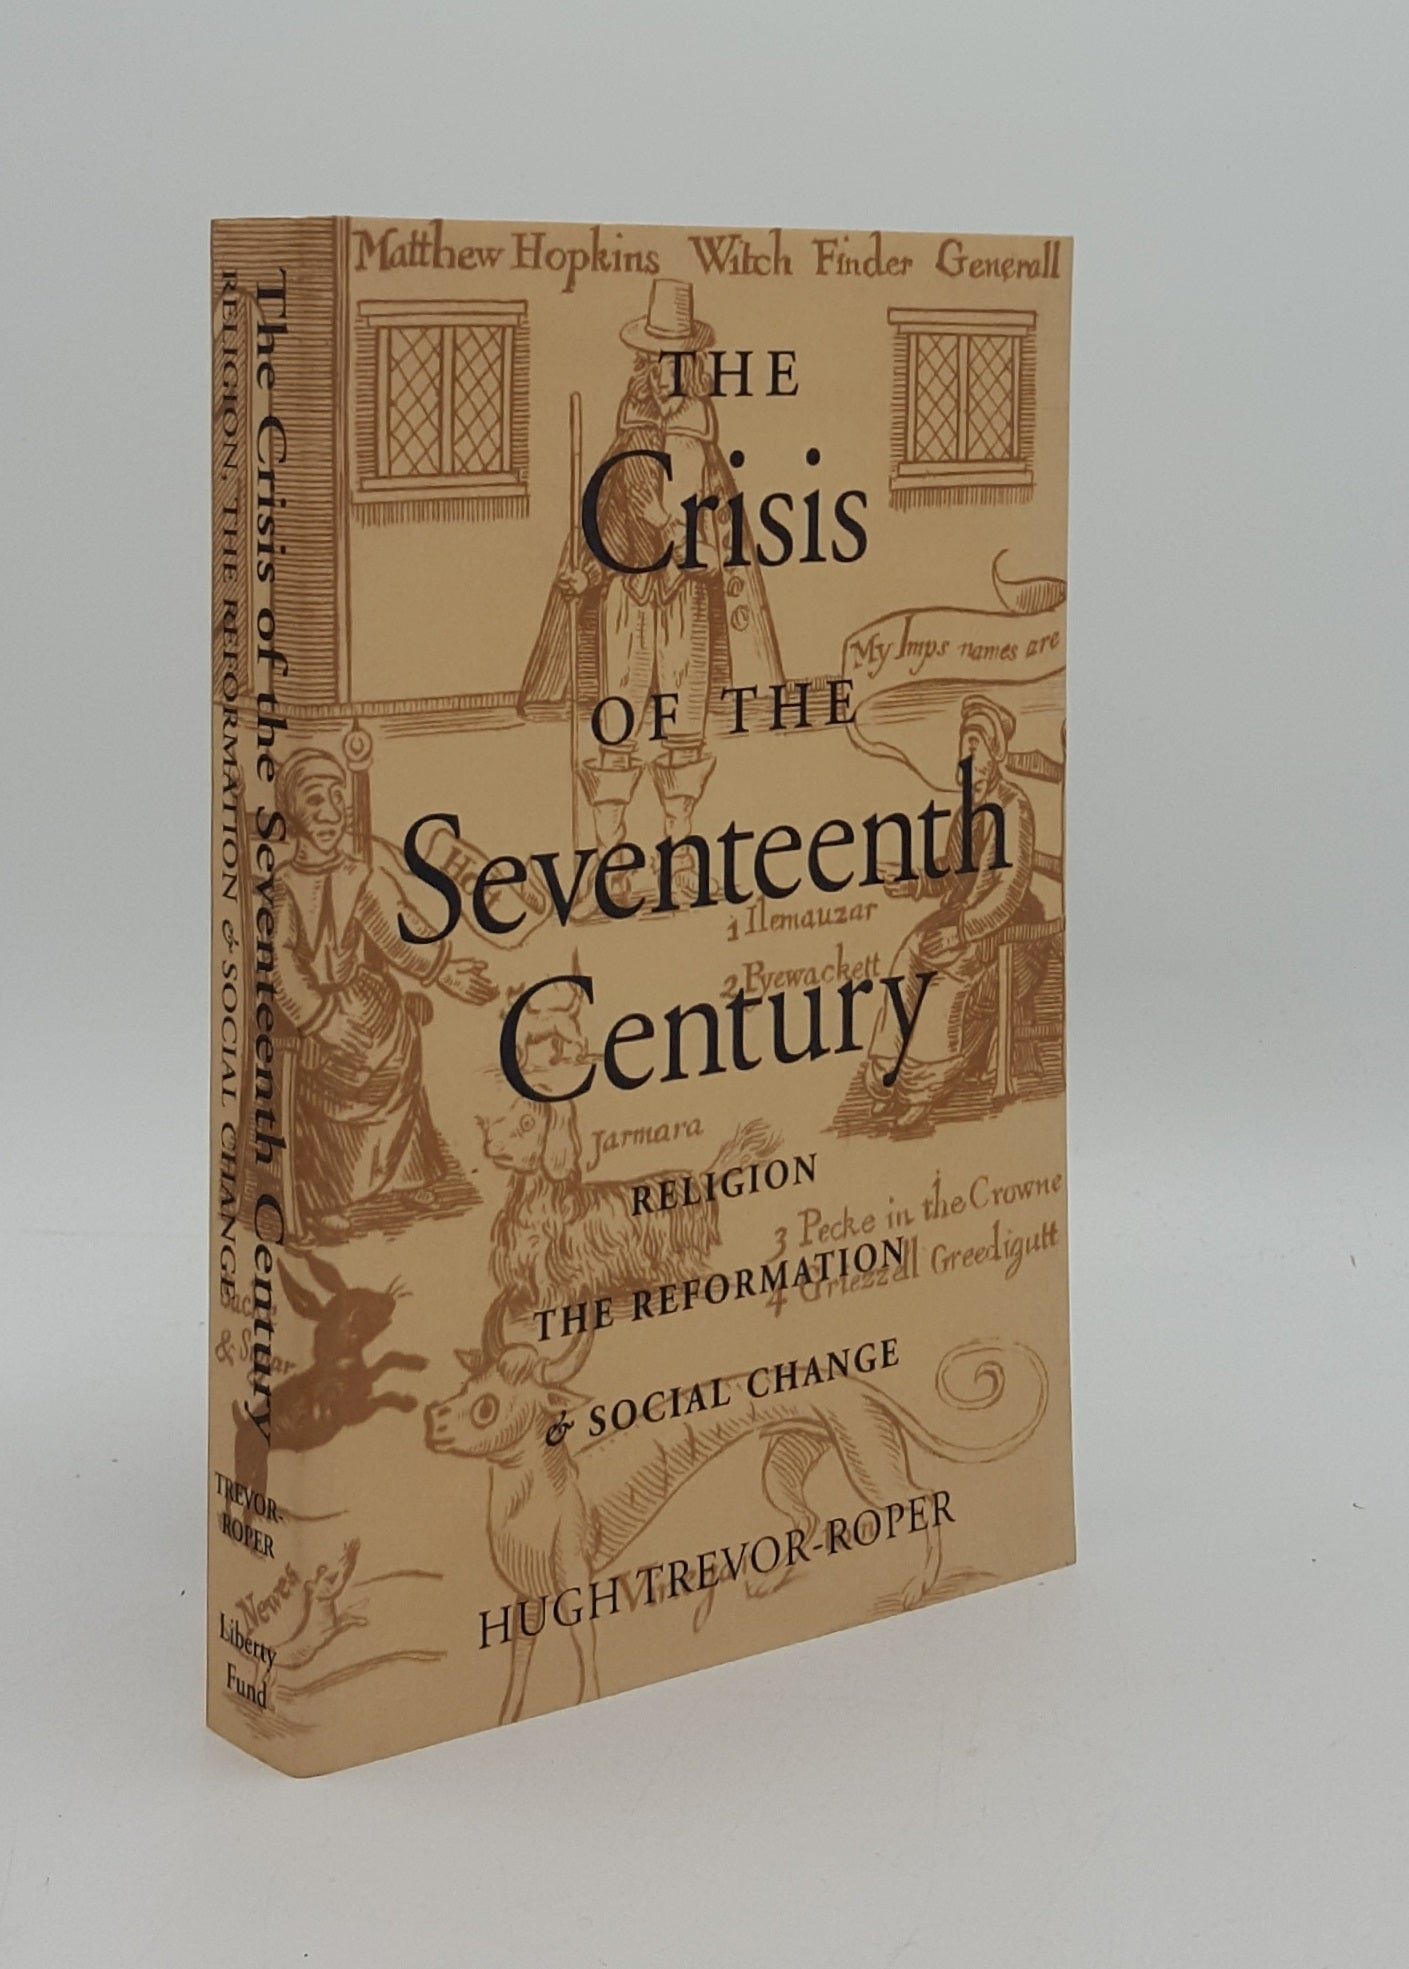 TREVOR-ROPER Hugh - The Crisis of the Seventeenth Century Religion the Reformation and Social Change